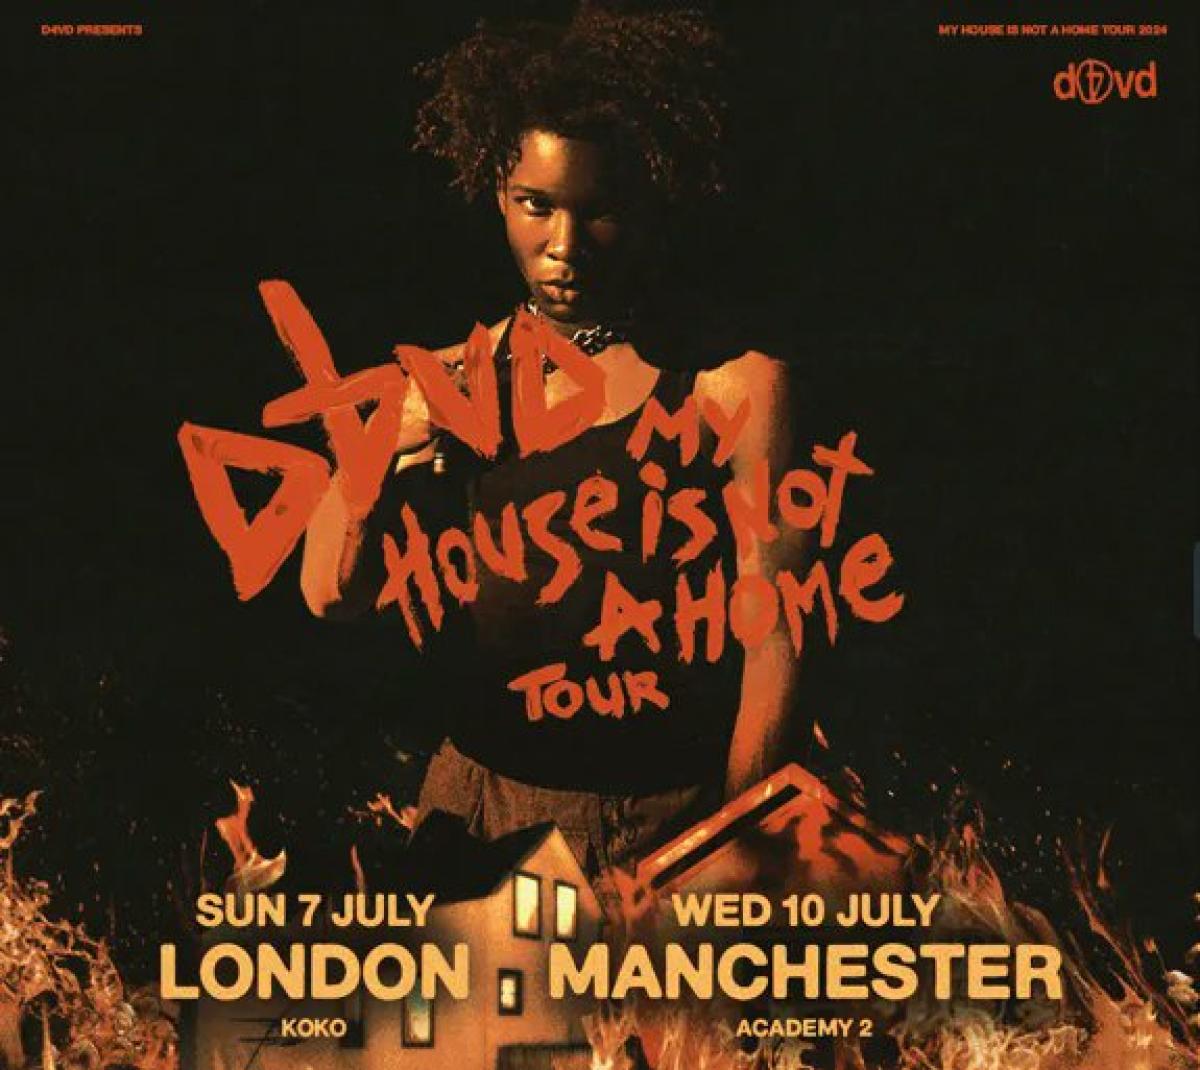 D4vd - My House Is Not A Home Tour at Manchester Academy Tickets